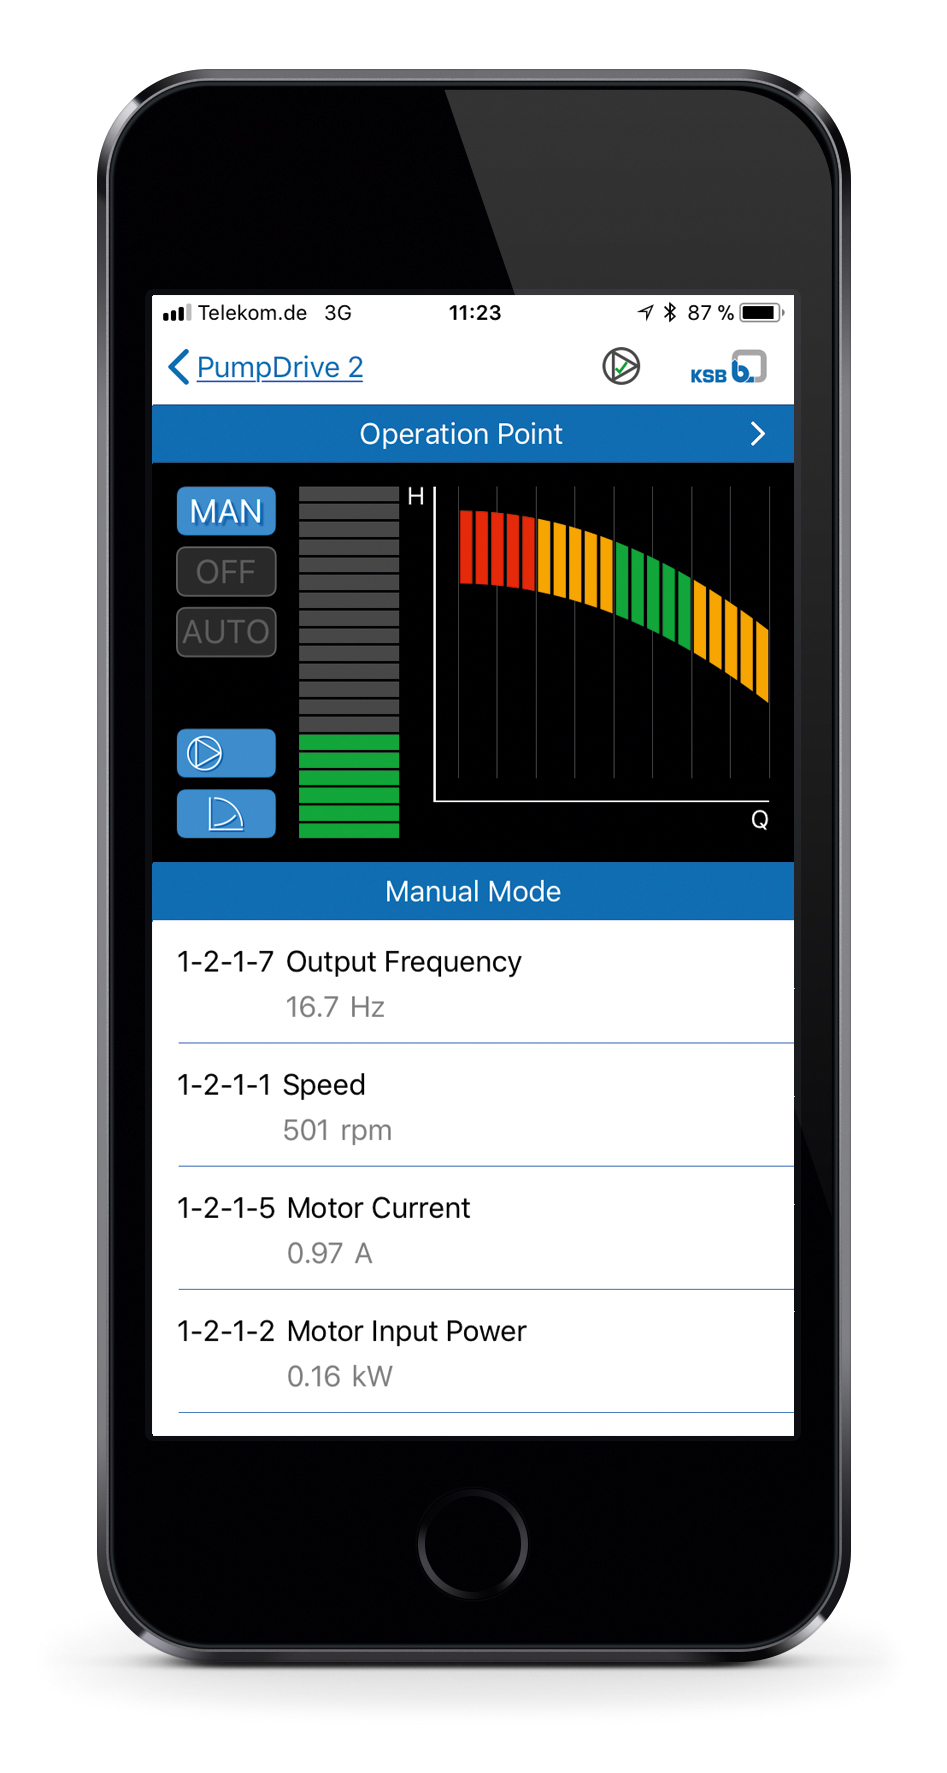 The new KSB FlowManager app allows users to communicate with their pumps and operate and configure them. (© KSB SE & Co. KGaA, Frankenthal, Germany)